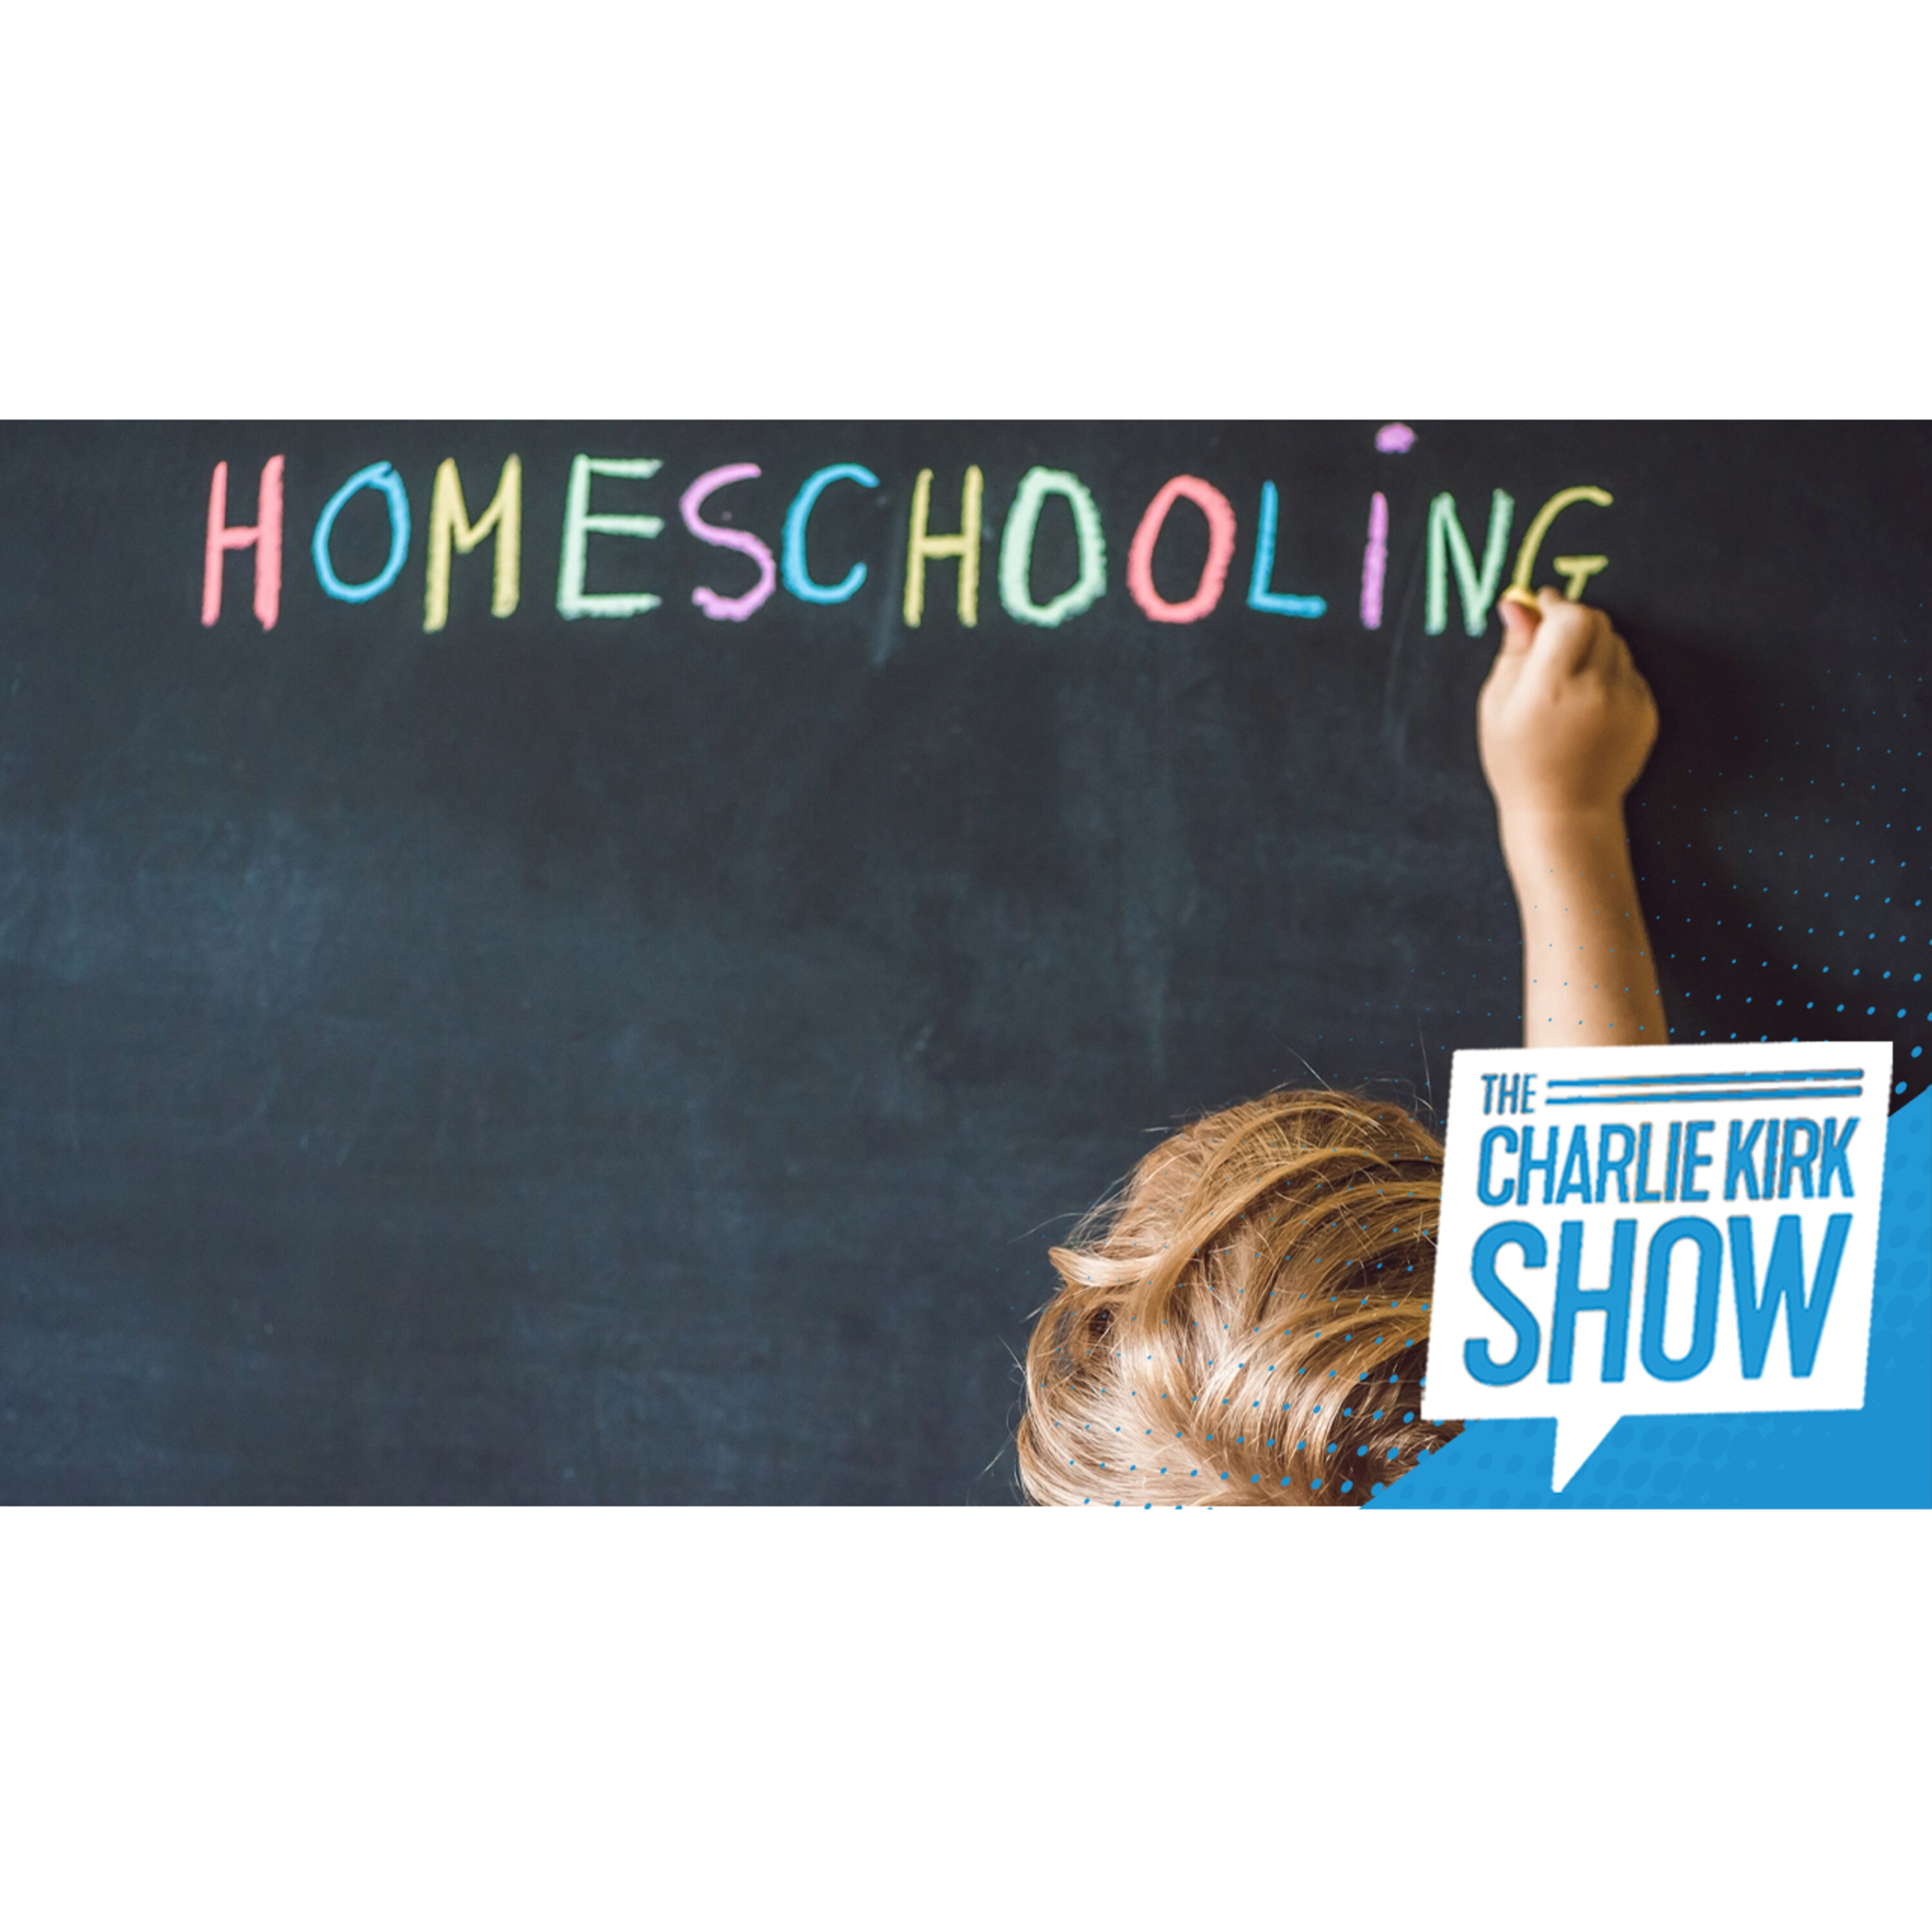 You Can Do It — Homeschooling with Leigh Bortins